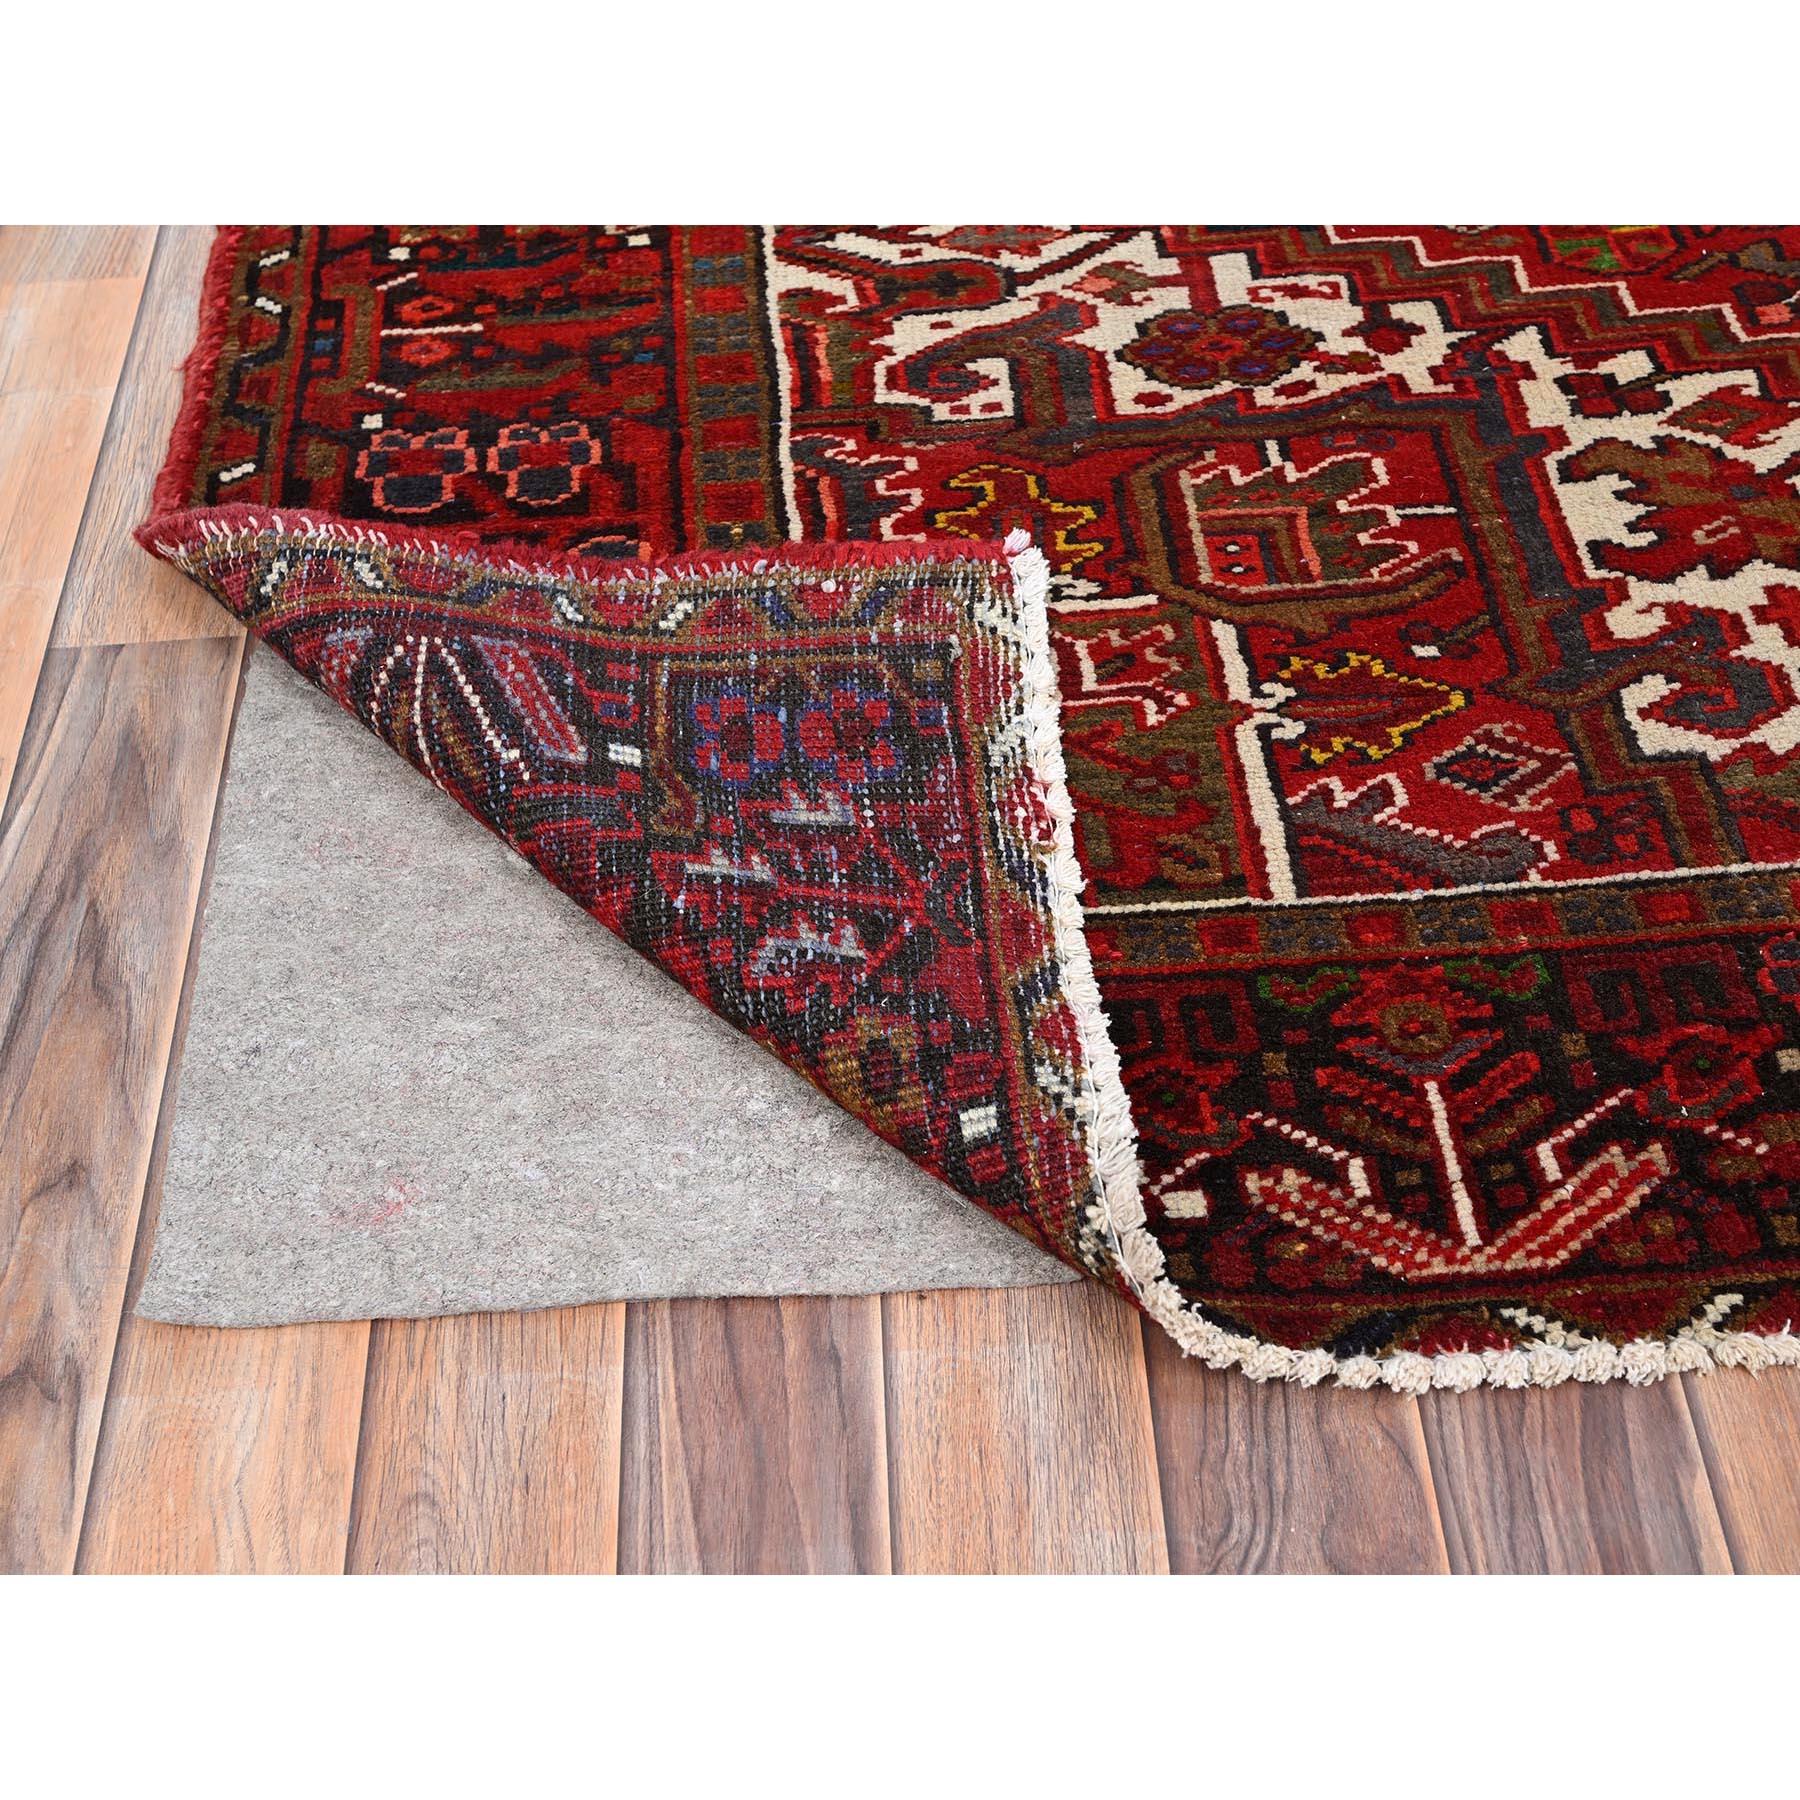 Mid-20th Century Imperial Red Semi Antique Persian Heriz Rustic Feel Worn Wool Hand Knotted Rug For Sale